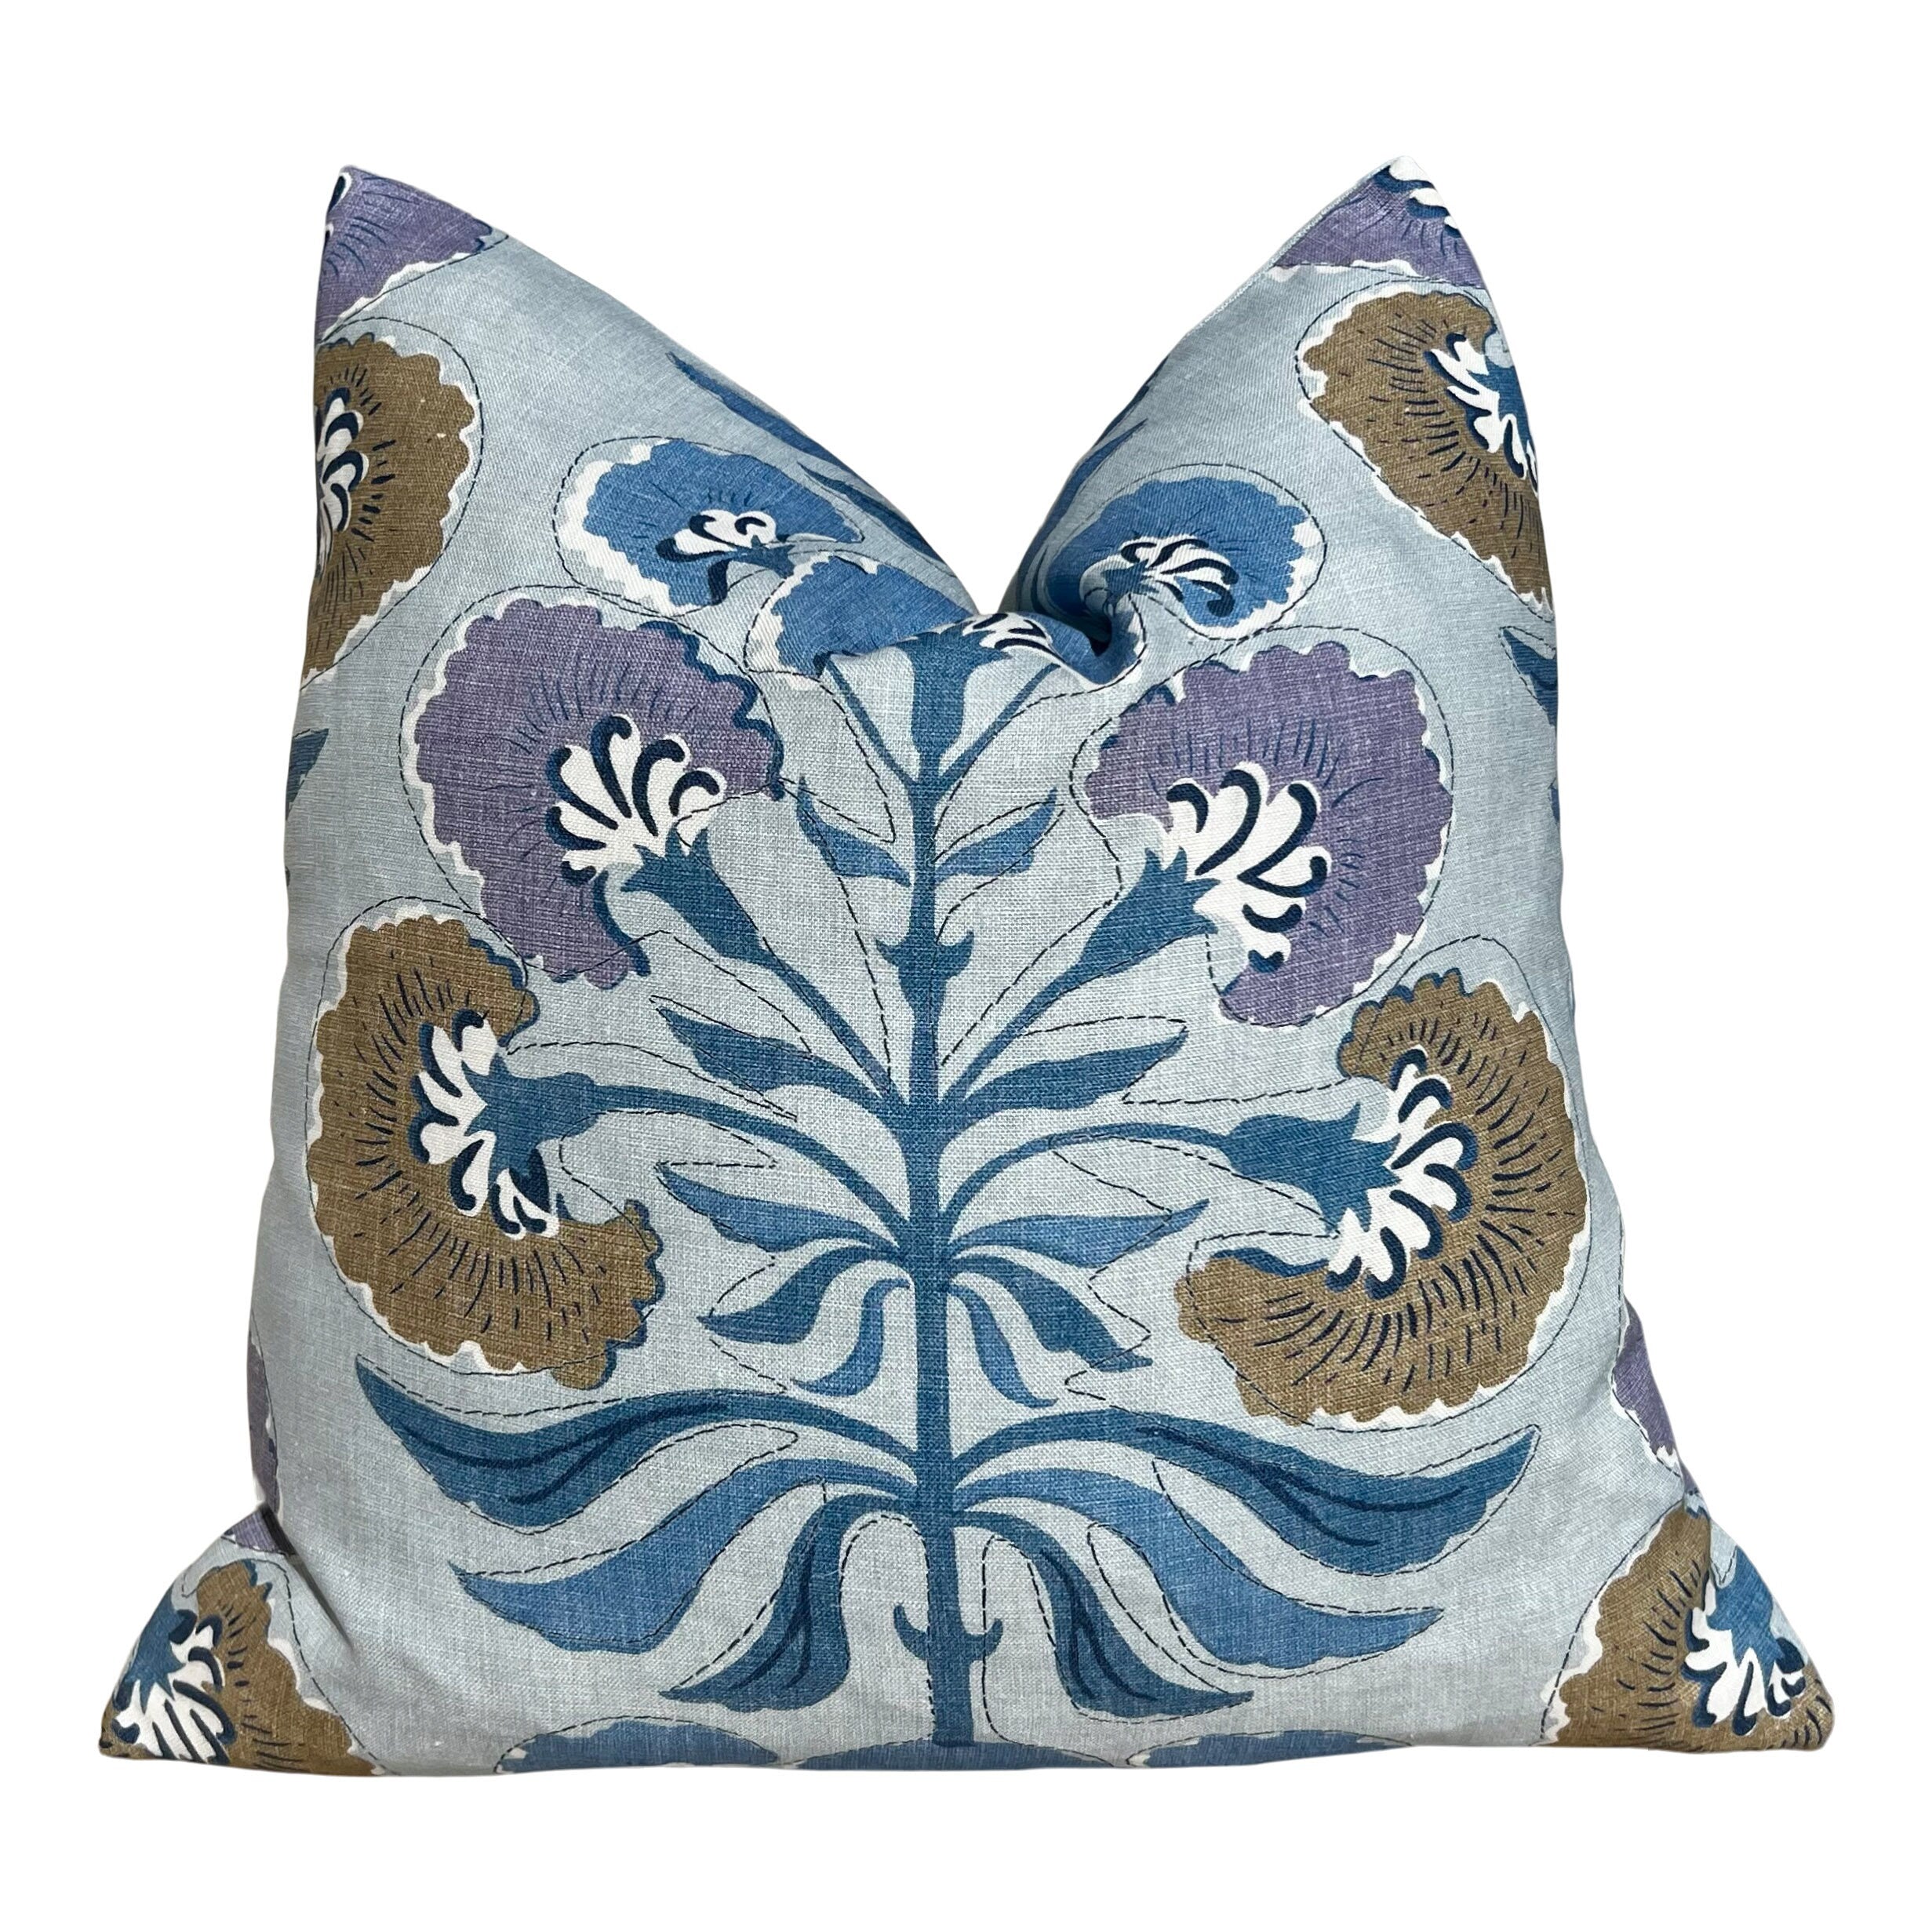 Thibaut Tybee Tree Pillow Lavender and Blue. Designer Botanical Pillows, Euro Sham Covers 26"X26", Floral Pillow Blue Red, High End Pillow